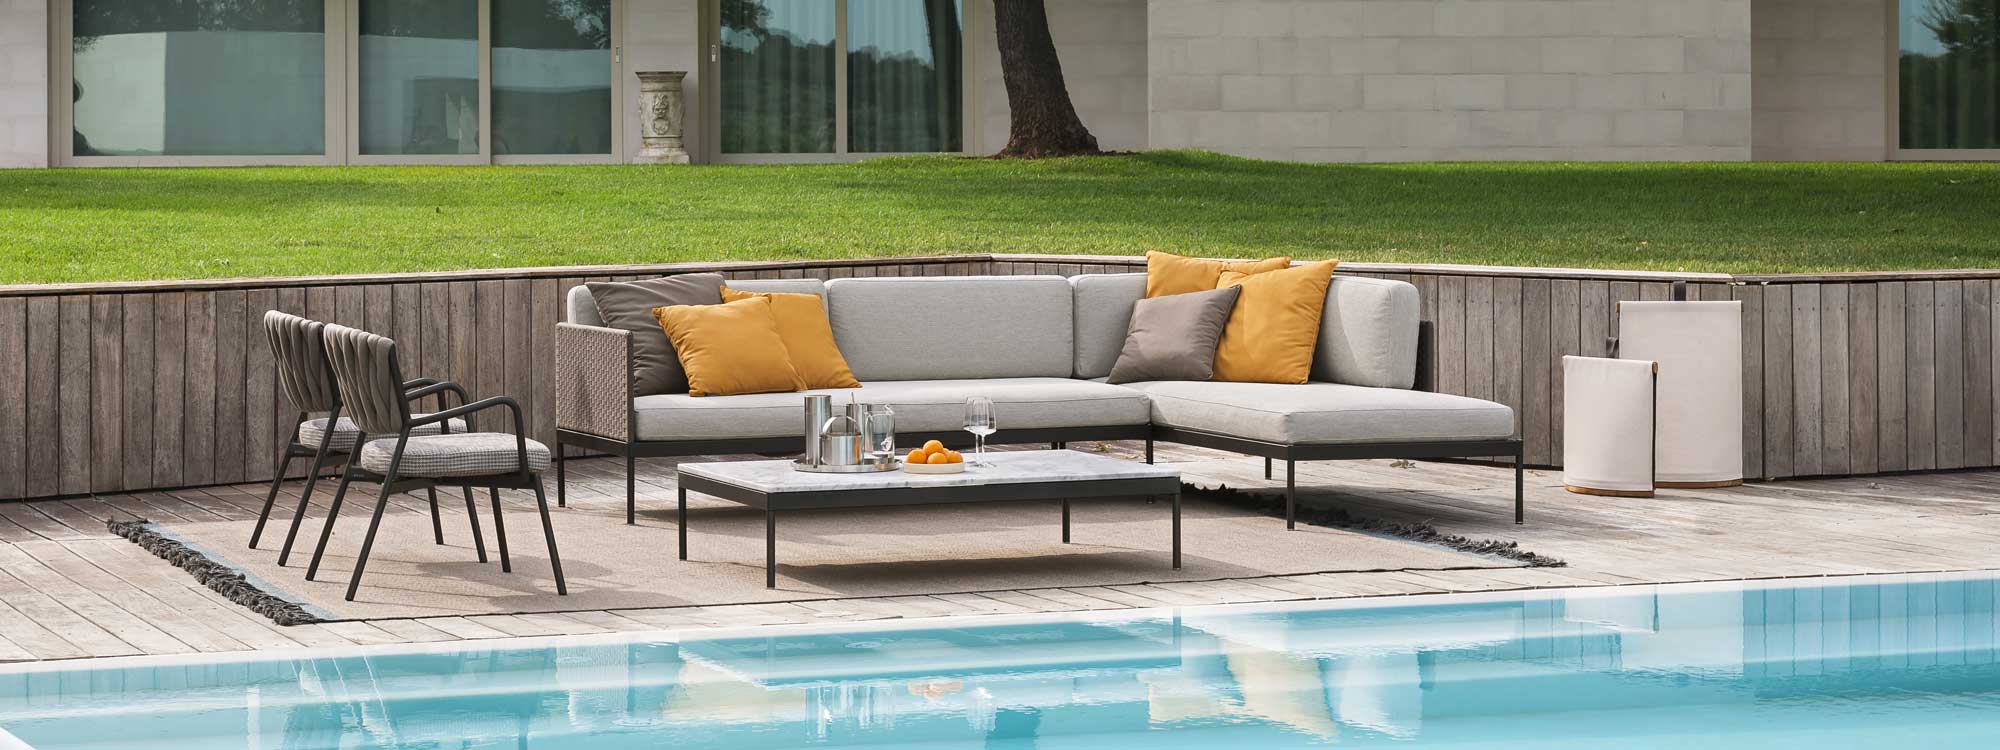 Basket outdoor corner sofa by swimming poolt